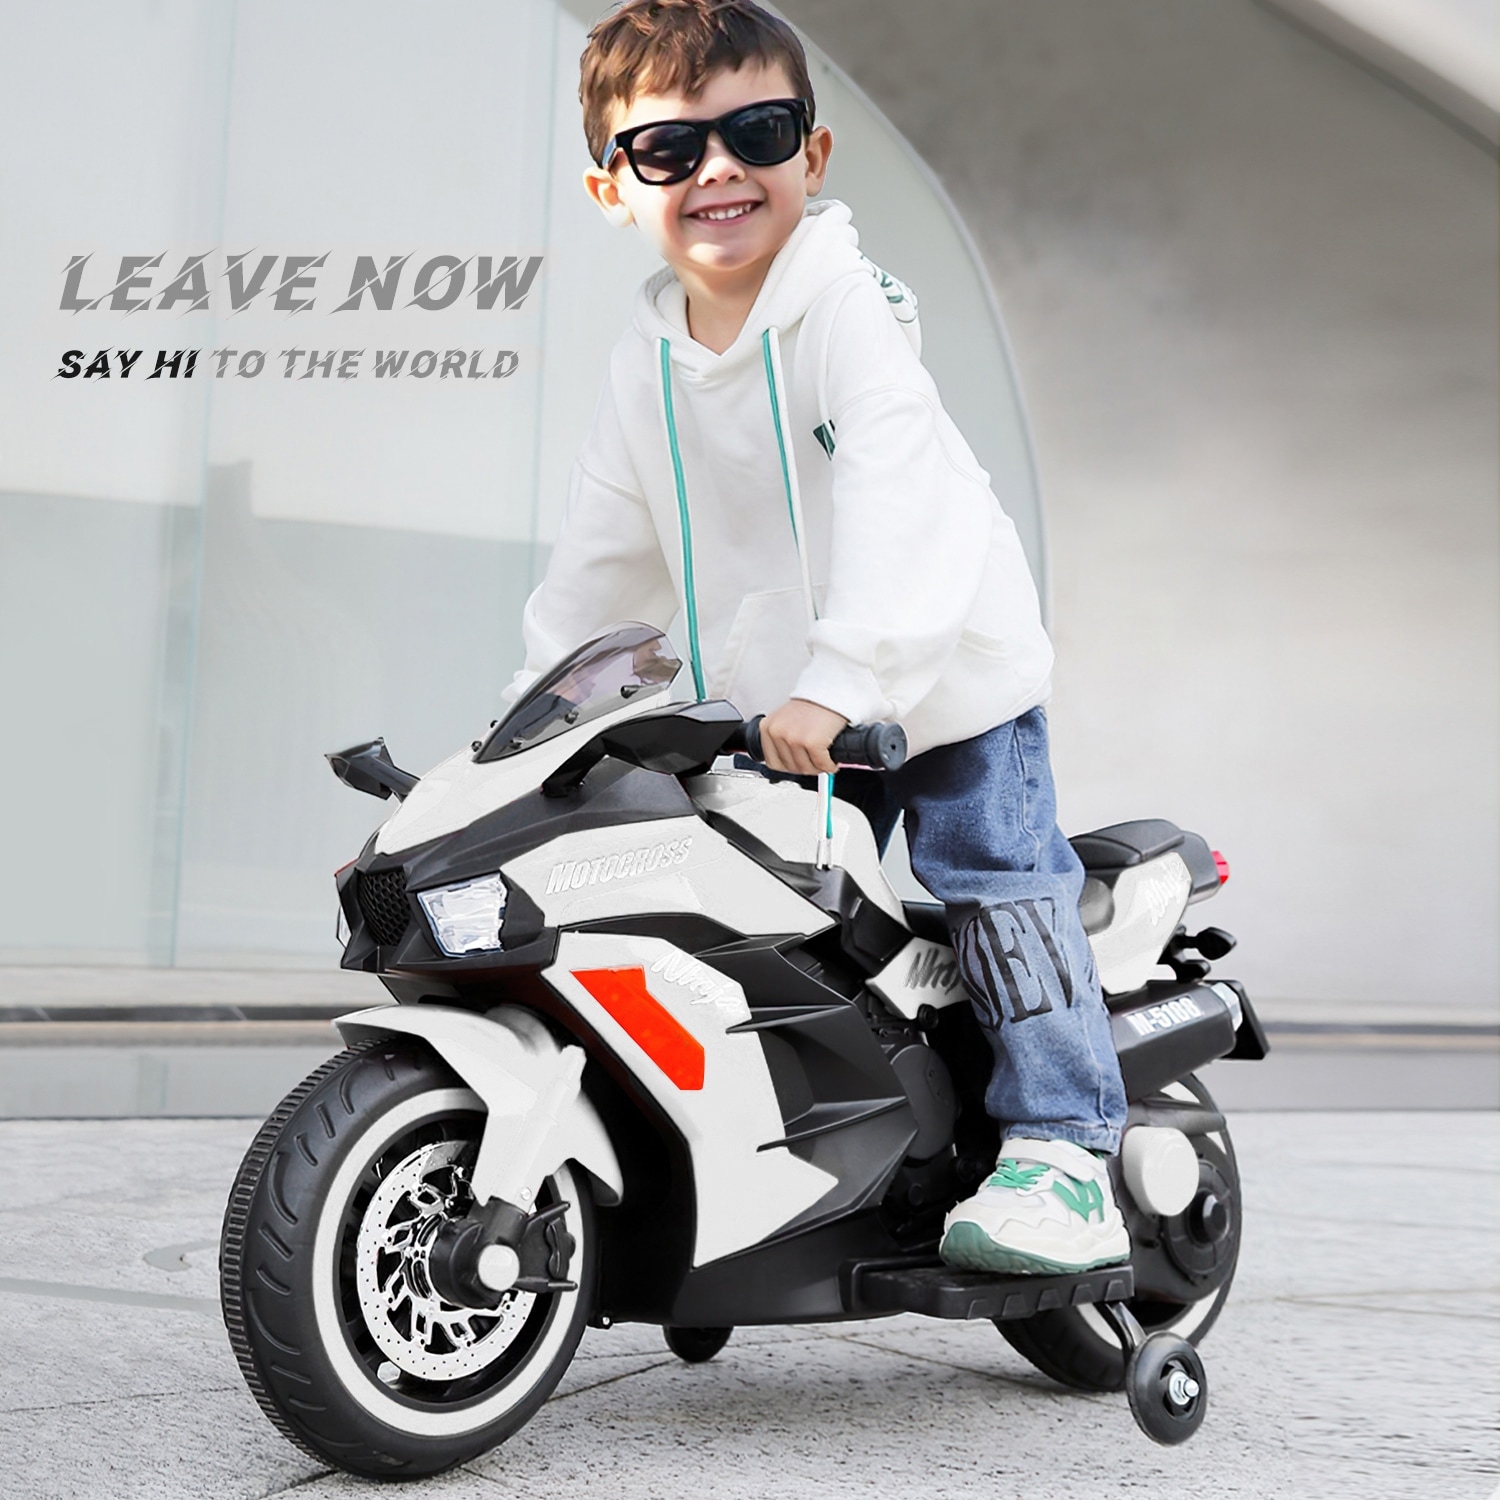 2 Wheel Kids Ride On Motorcycle, with LED Light & ...